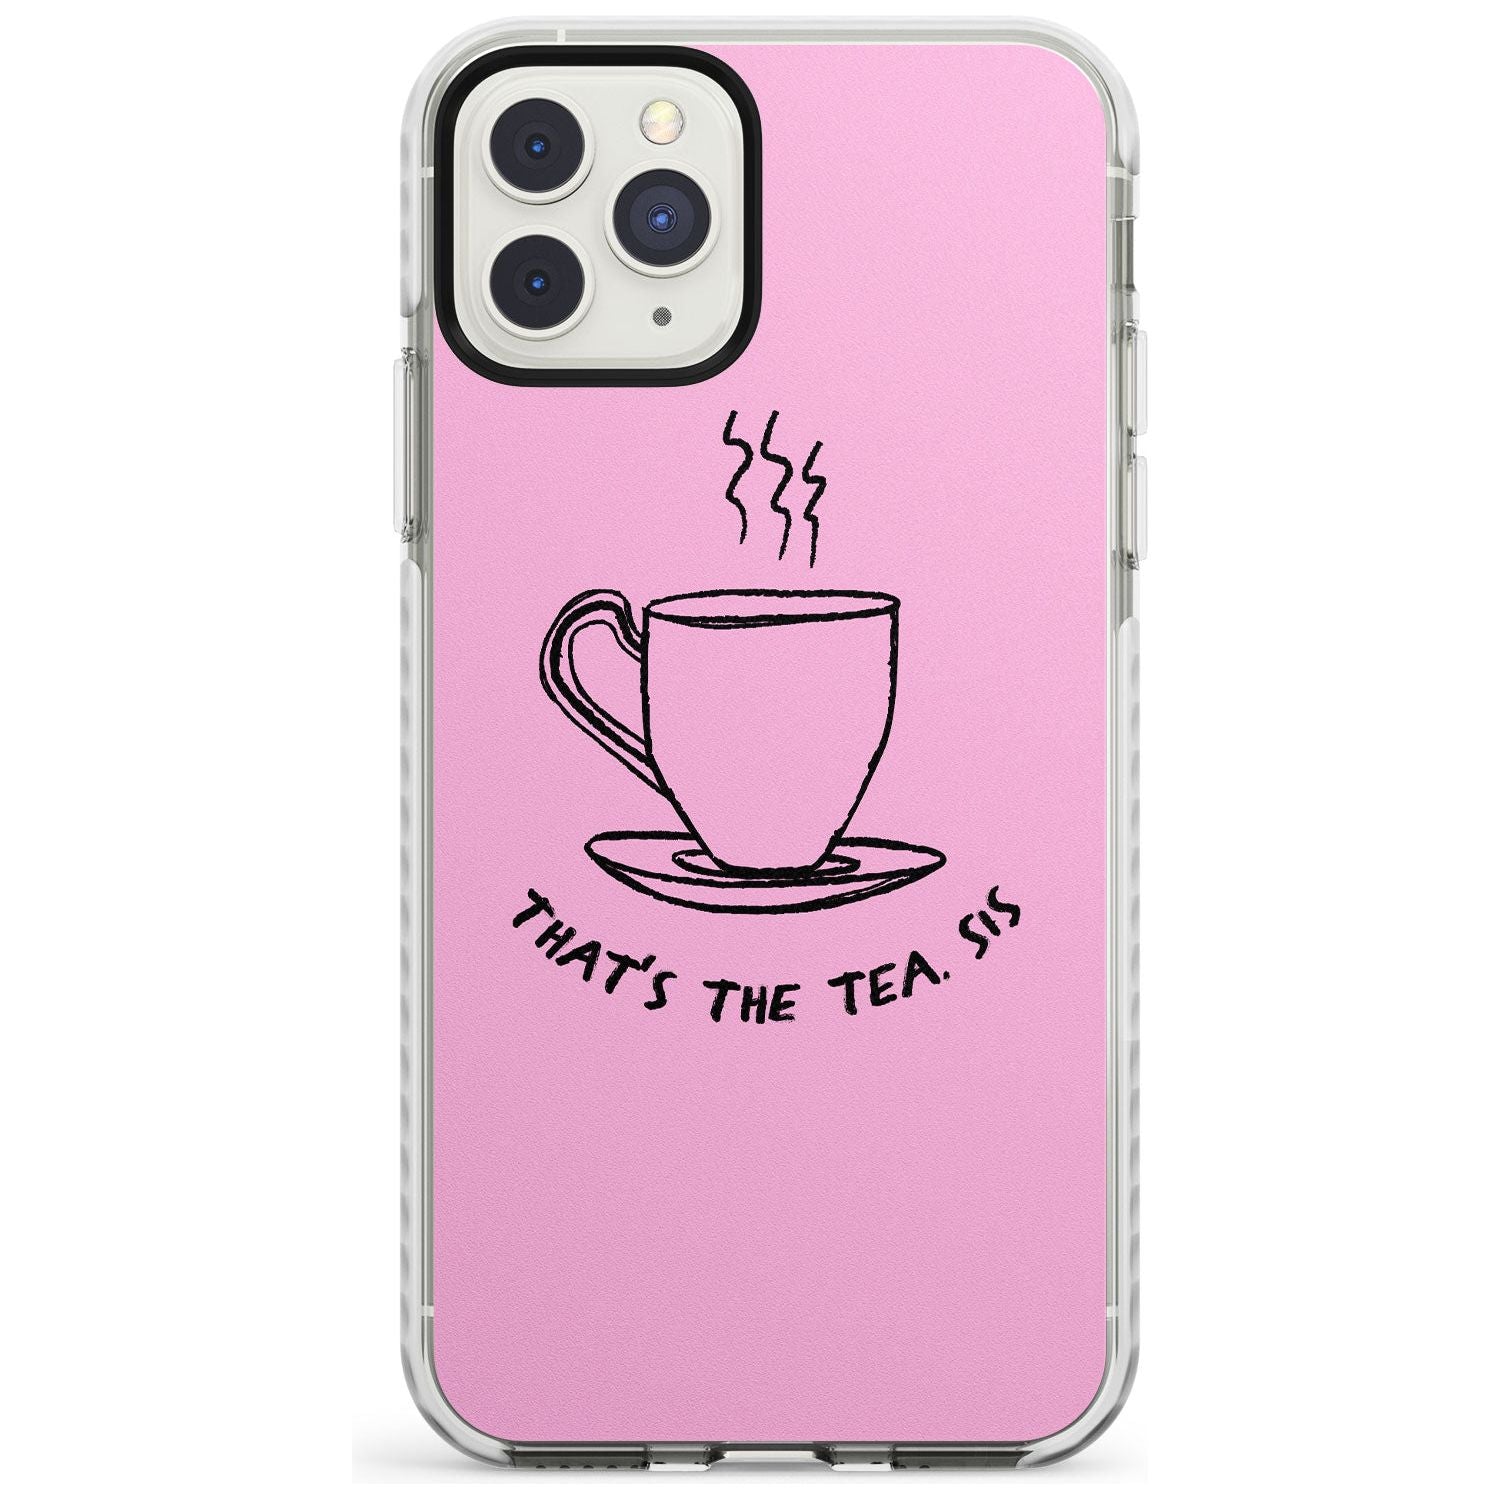 That's the Tea, Sis Pink Impact Phone Case for iPhone 11 Pro Max